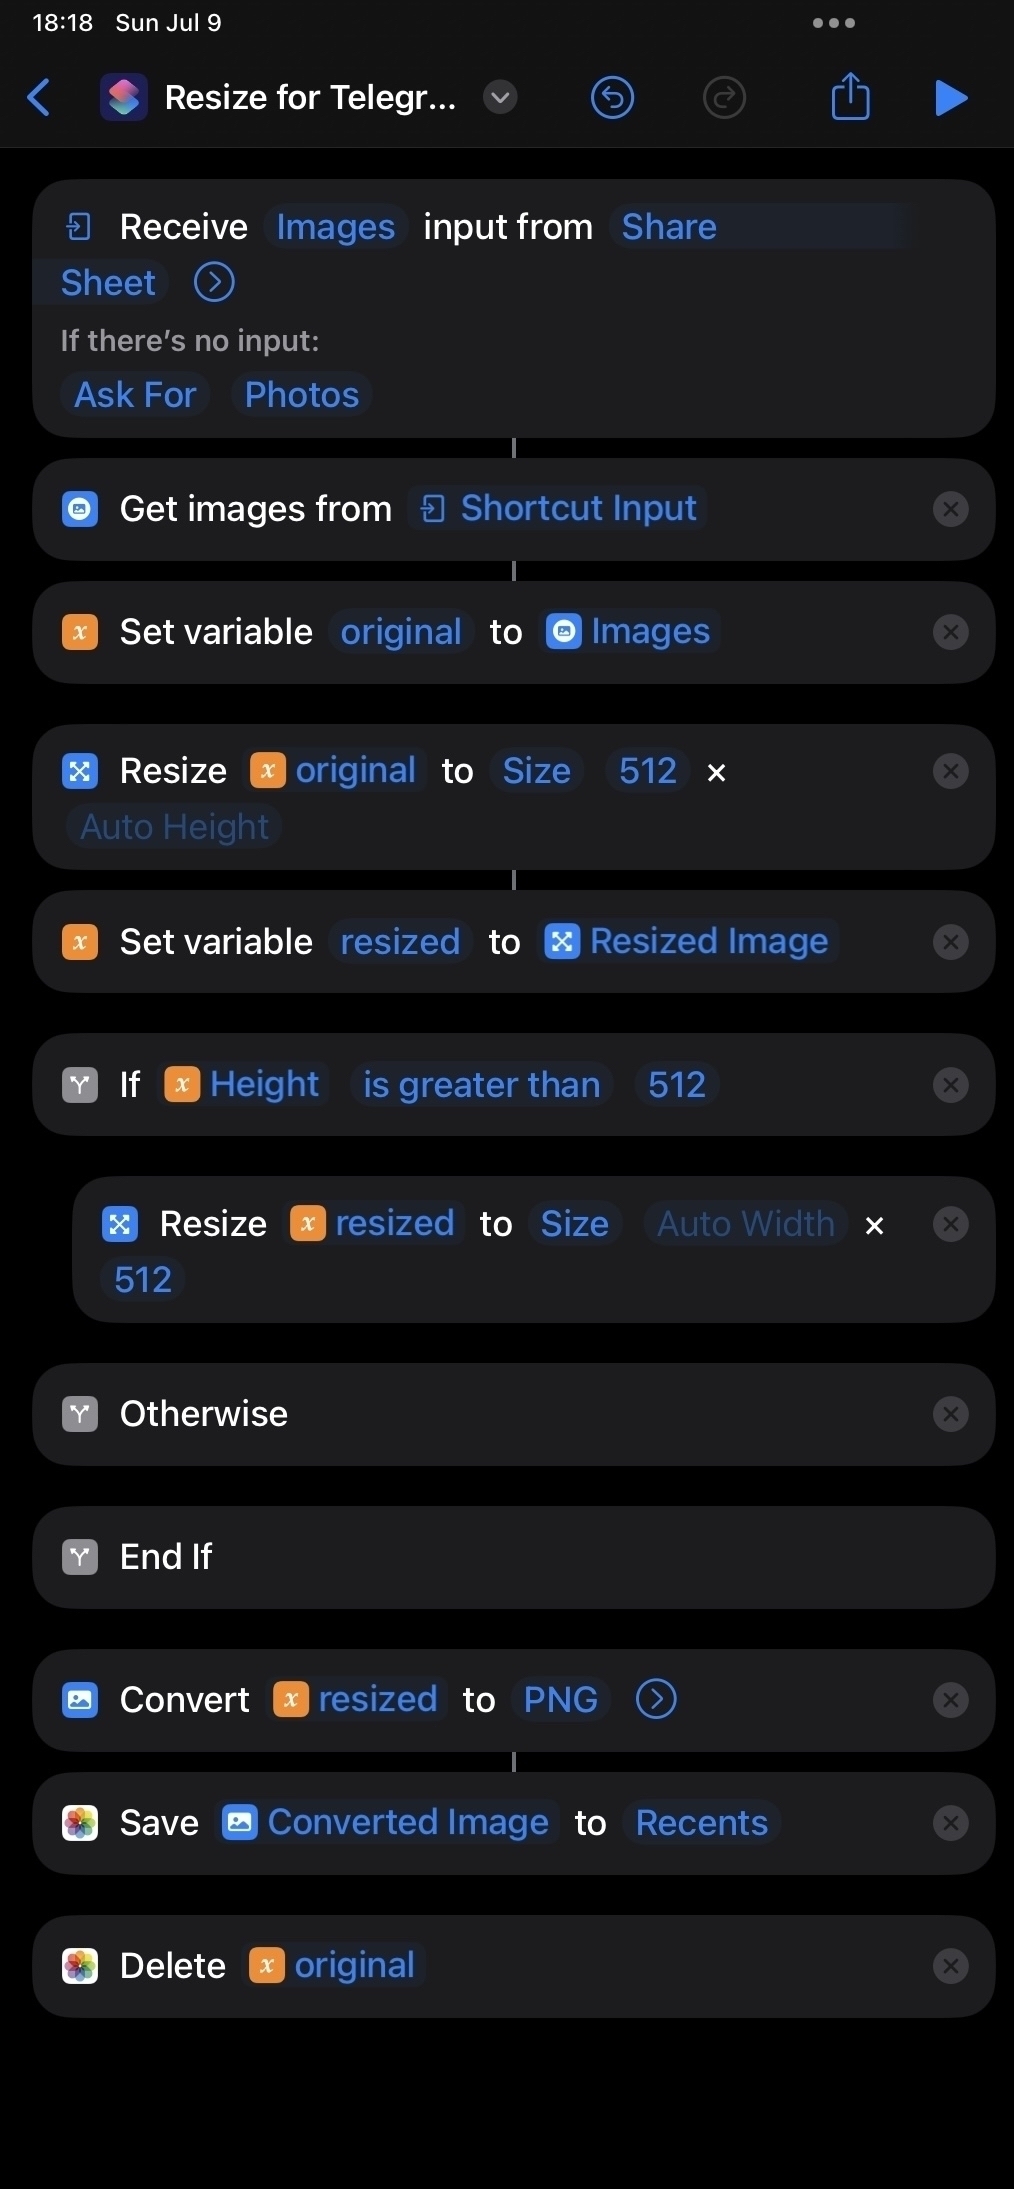 Screenshot of the whole step-by-step process the Resize for Telegram Stickers iOS Shortcut, which involves resizing the image to 512 pixels, then converting it to PNG before saving to your Photos app